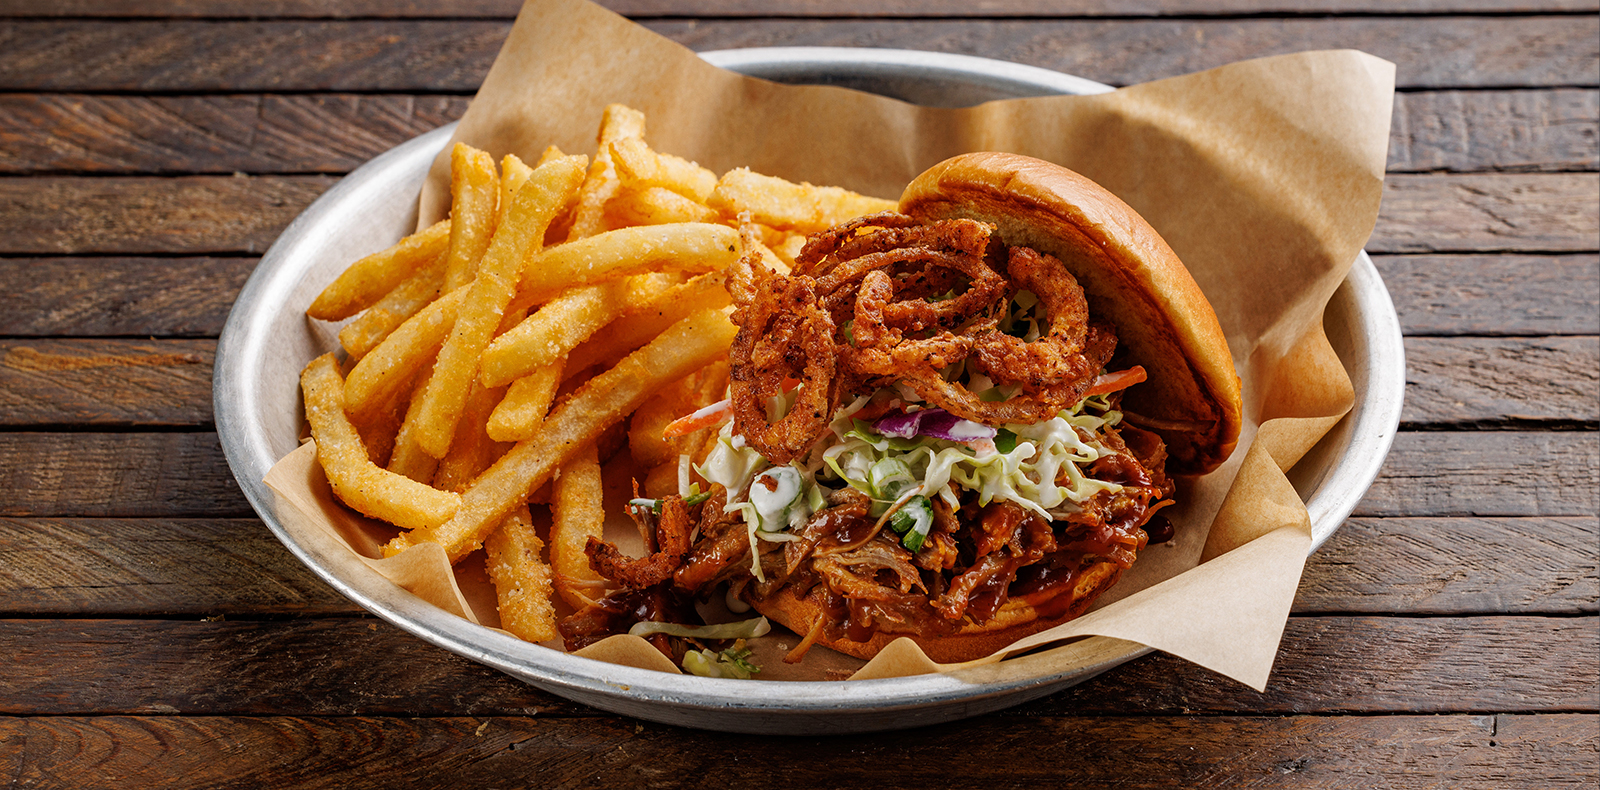 Tender pulled pork tossed in a tangy Carolina-style BBQ sauce, coleslaw + crispy onion straws